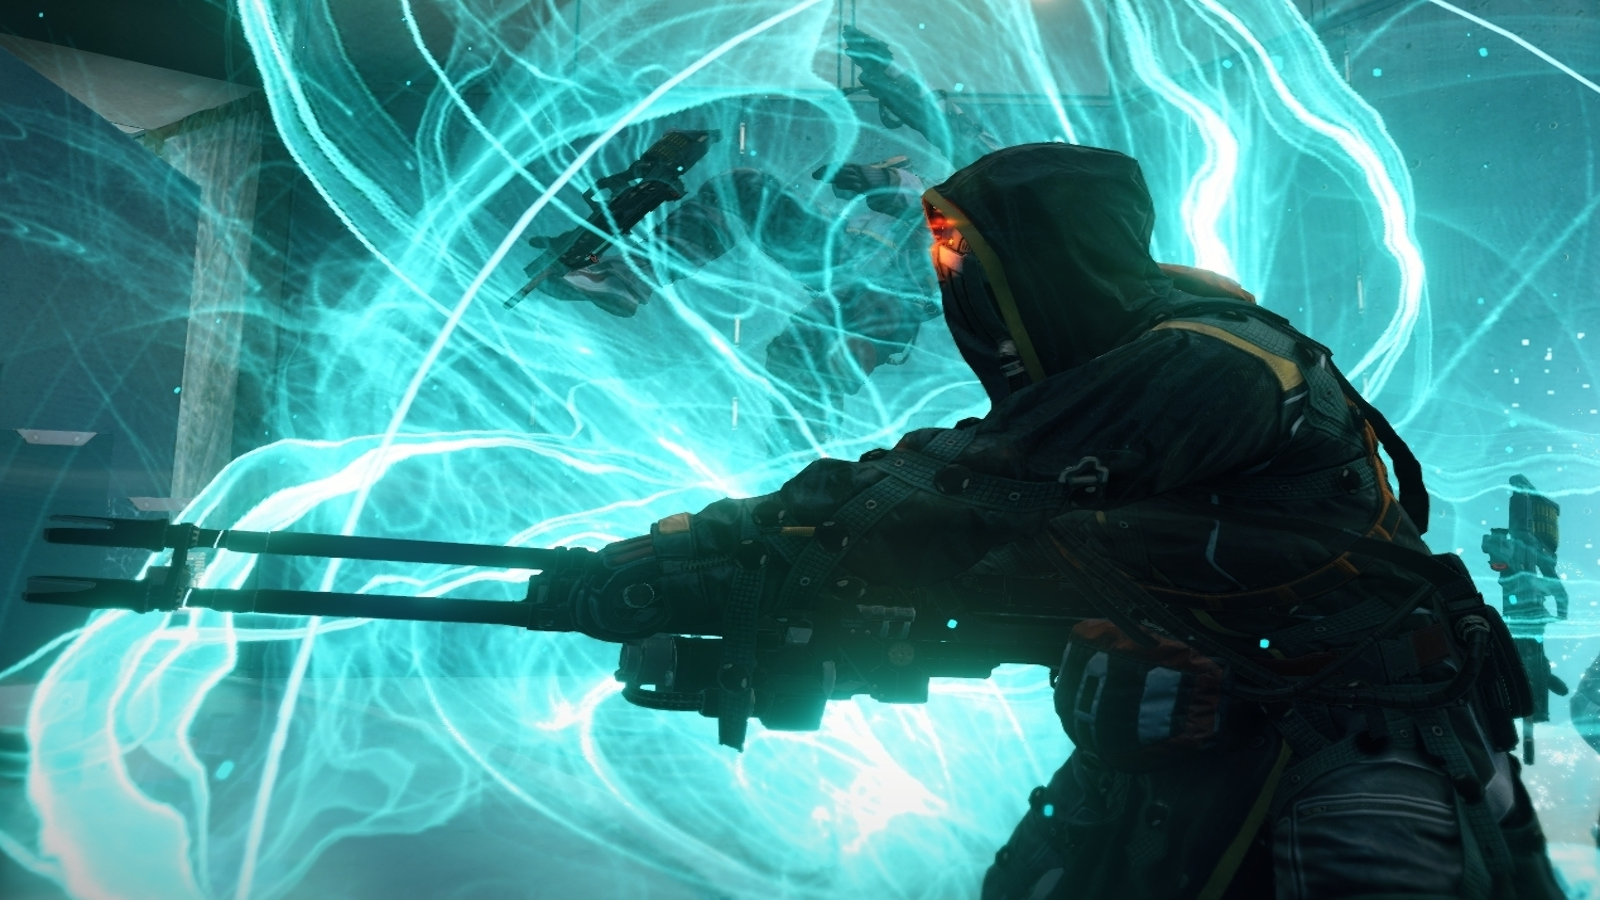 Sizing Up Next-Gen - PS4's 'Killzone Shadow Fall' Is A Whopping 50GB